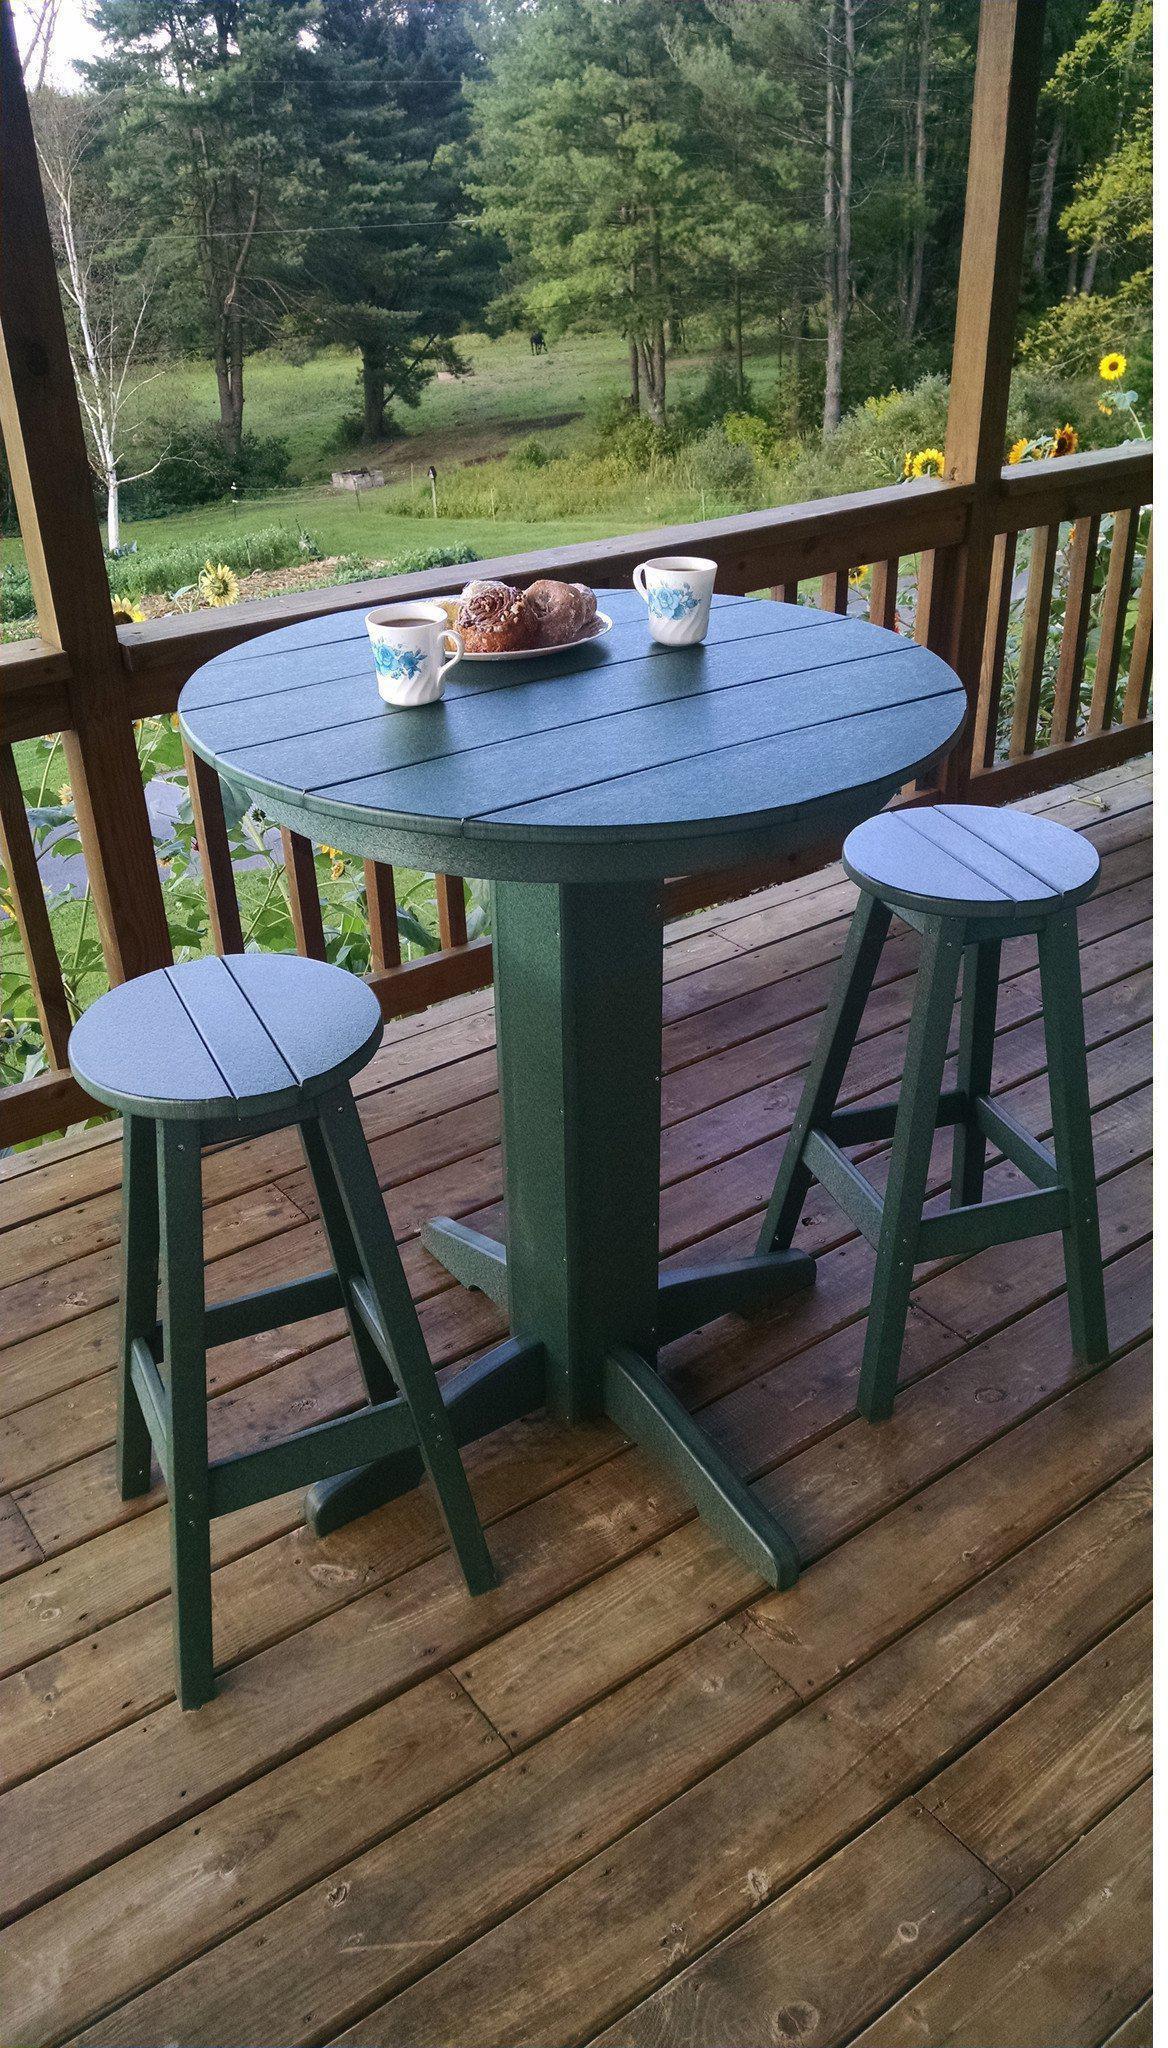 A&L Furniture Recycled Plastic Bar Stool - LEAD TIME TO SHIP 10 BUSINESS DAYS